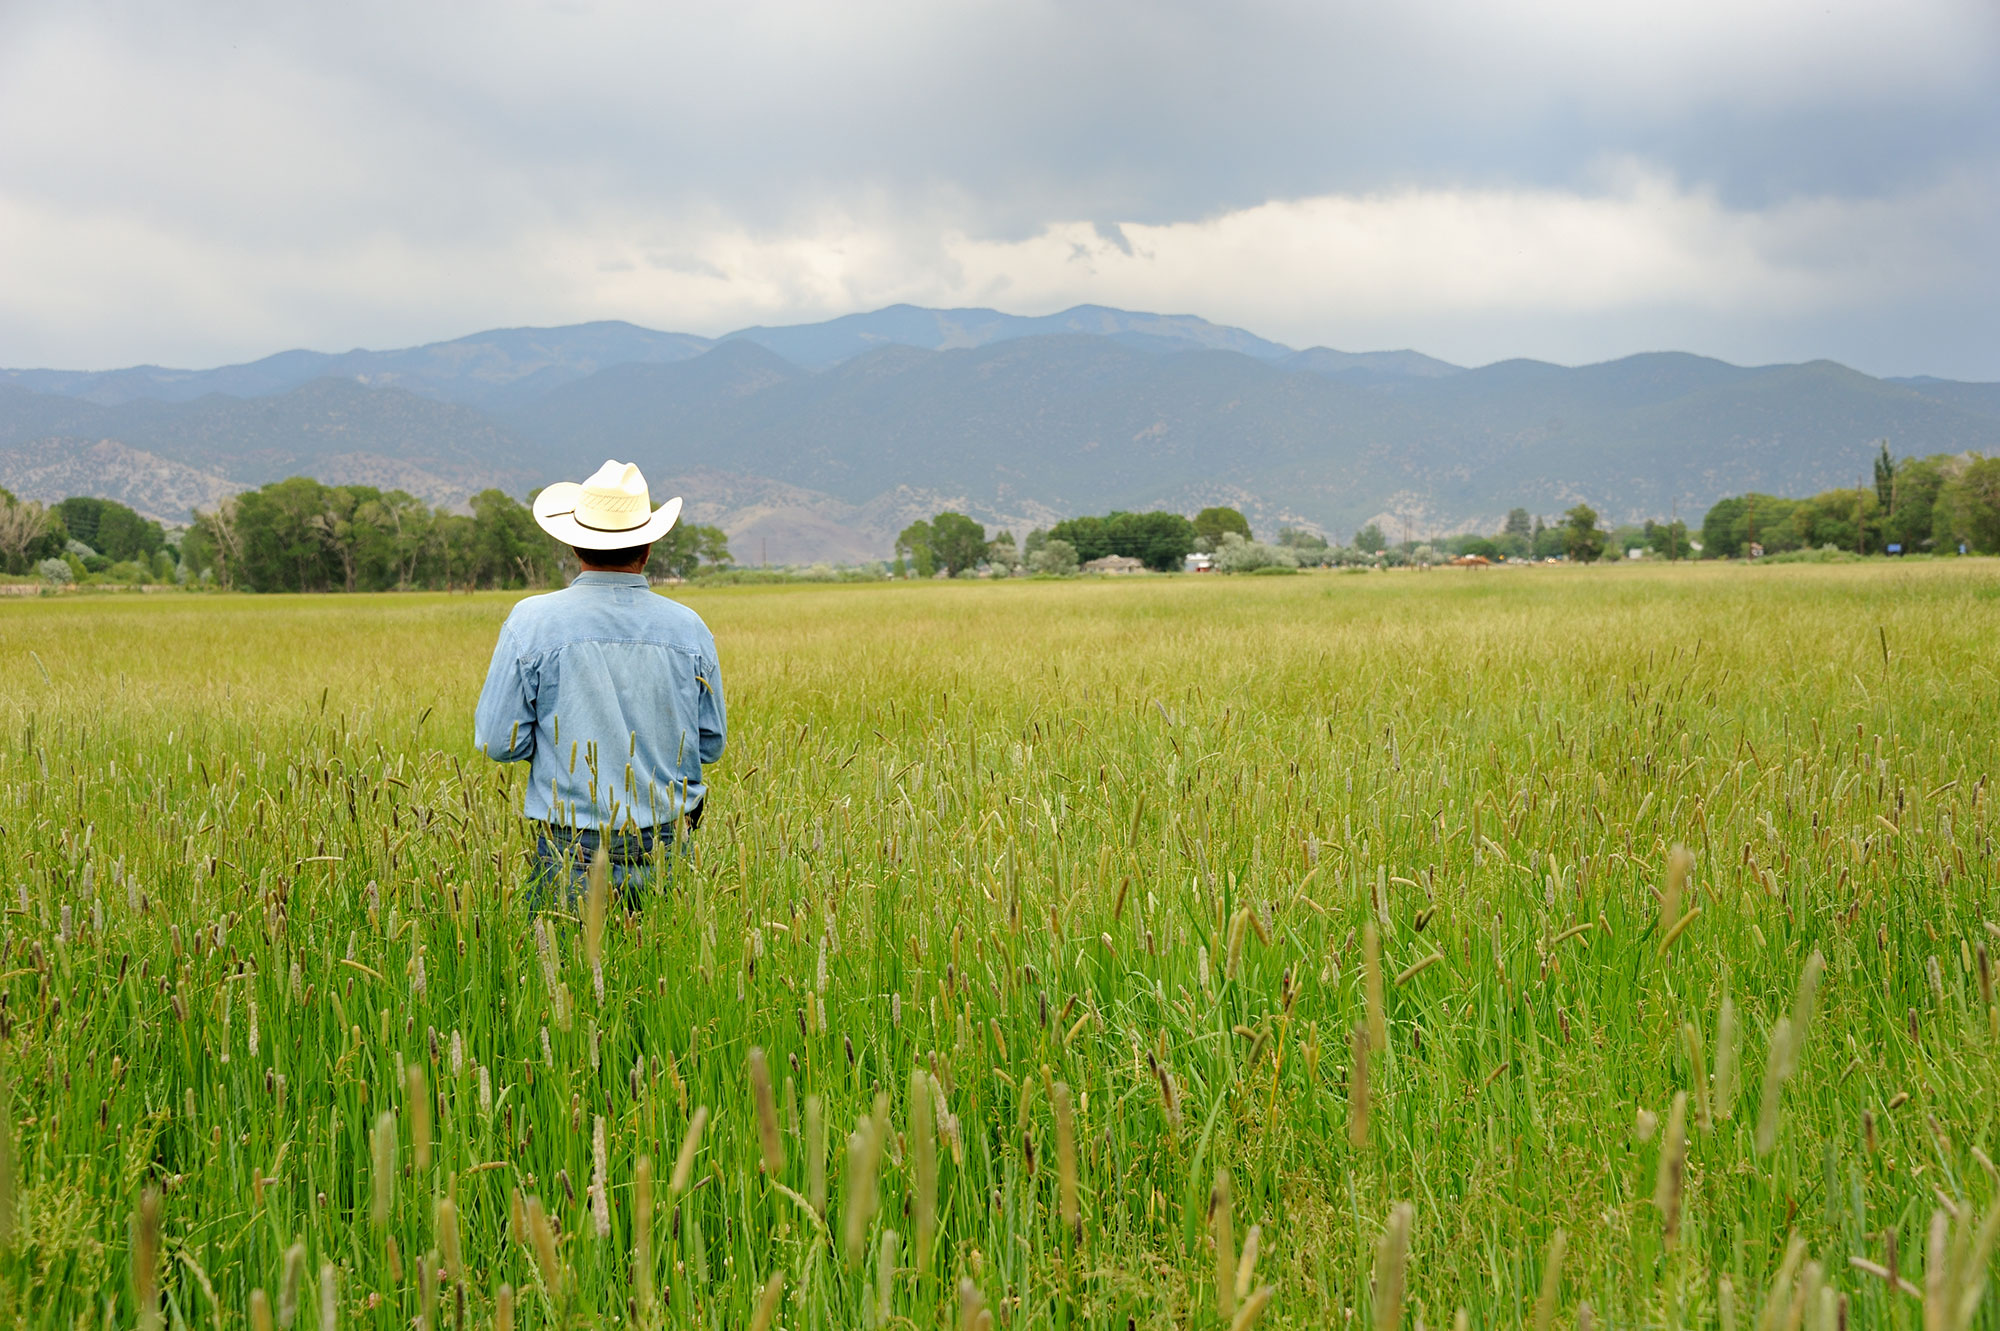 A man in a cowboy hat standing in a field.